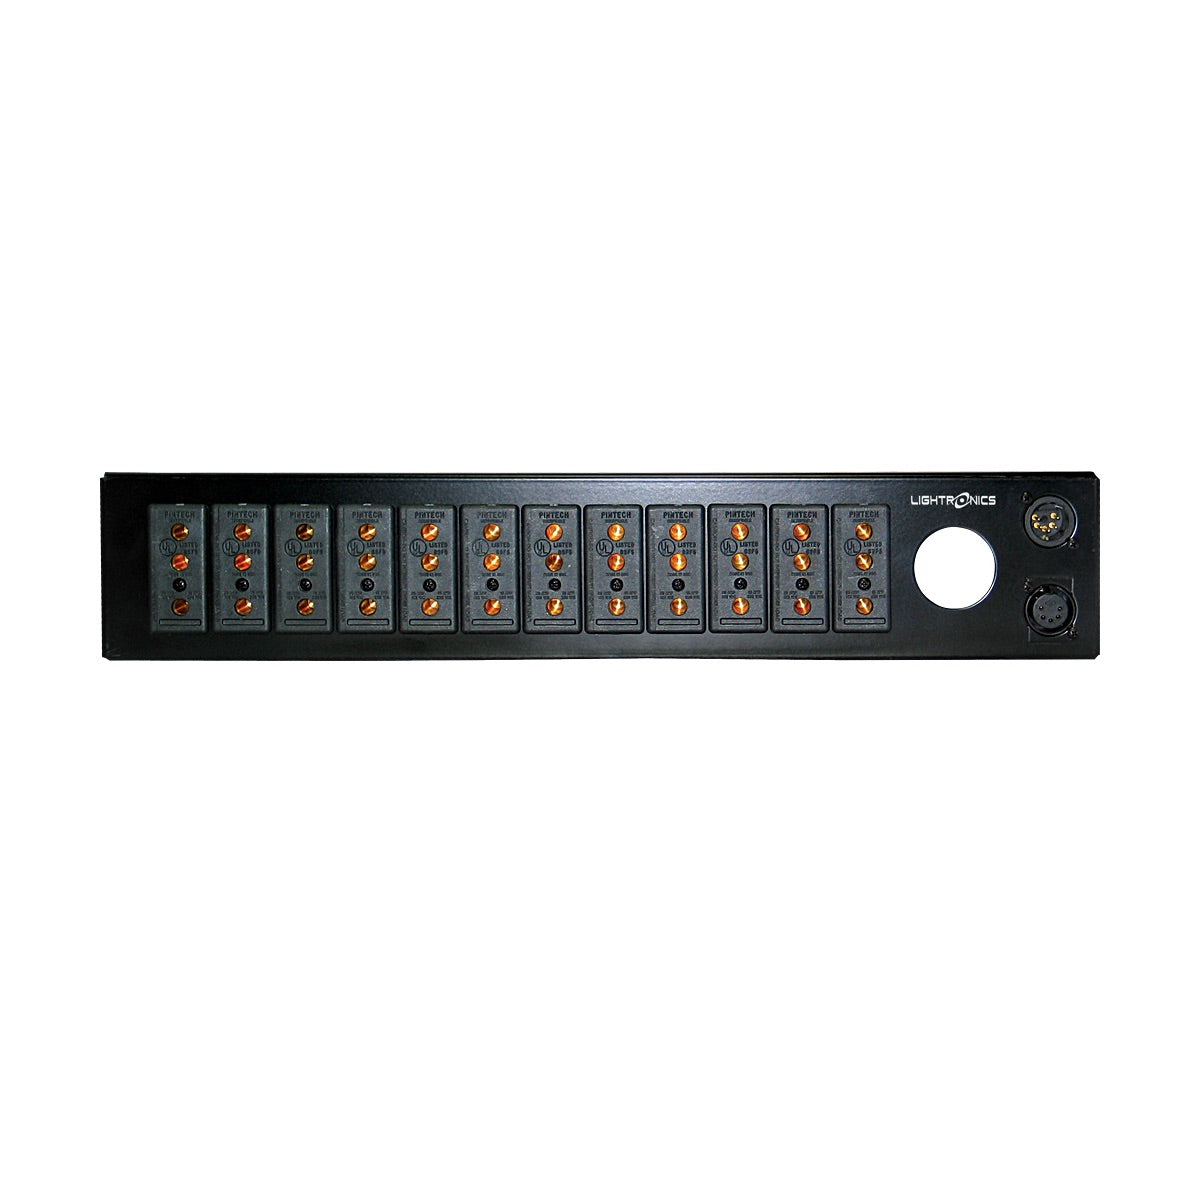 Lightronics RD121 Rack Mount Dimmer, RD Series, rear Stagepin Outlet Panel